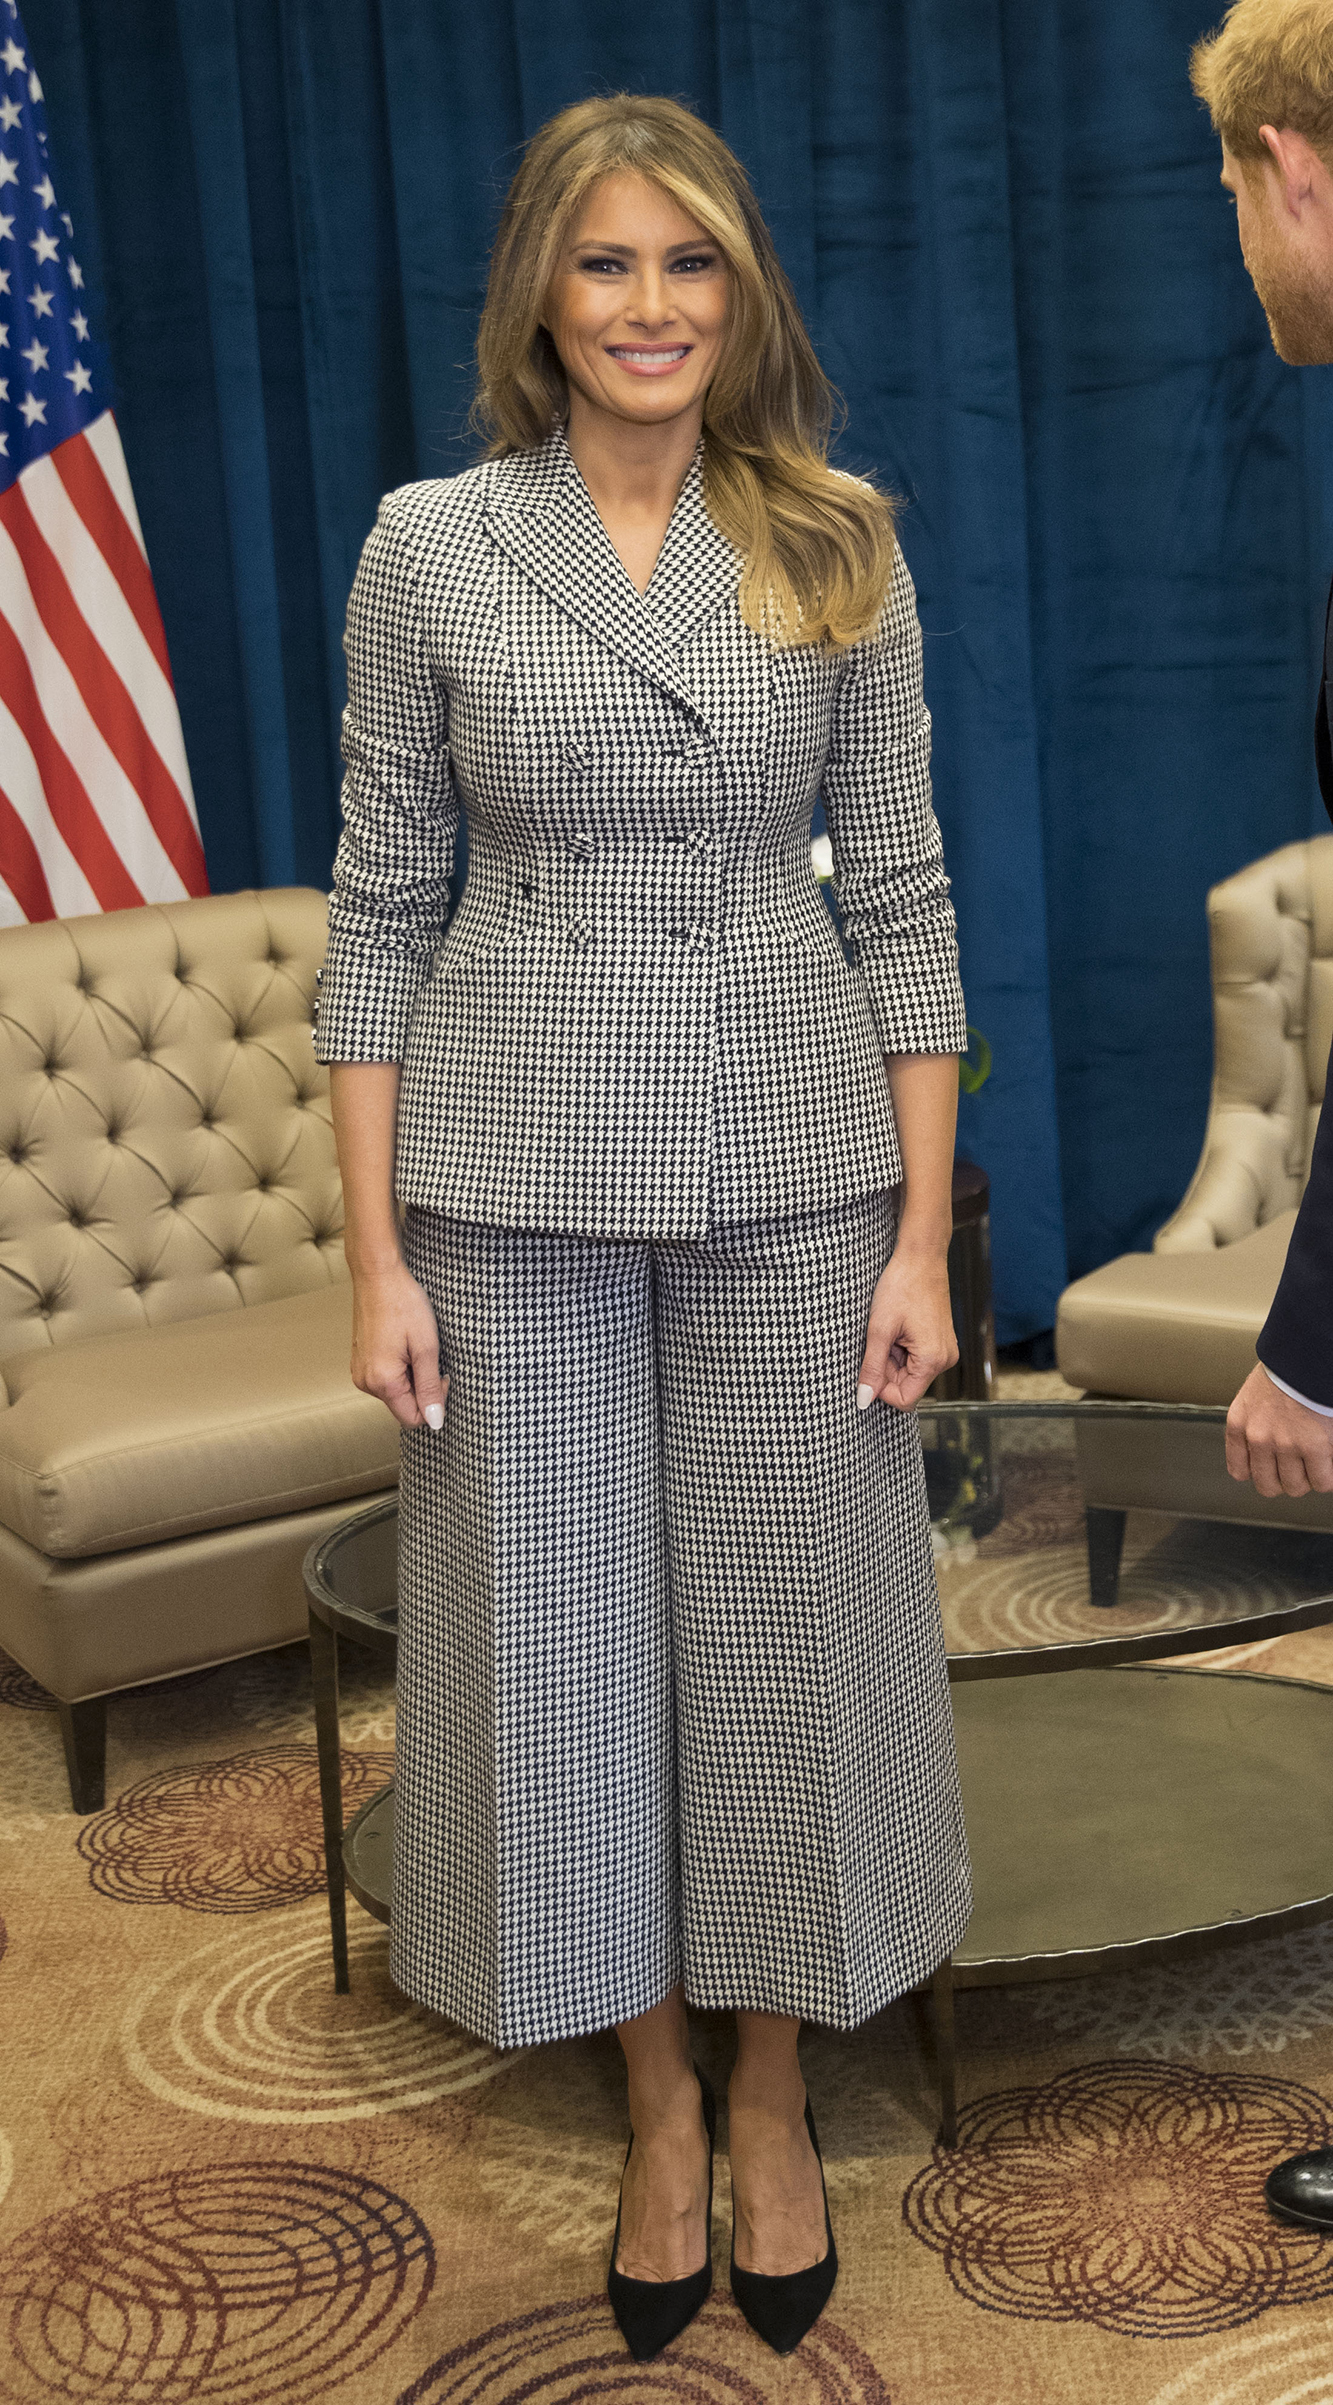 First lady Melania Trump wearing black-and-white checkered culottes suit by Dior,  at a bilateral meeting with Prince Harry on day one of the Invictus Games in Toronto, Canada,
                              Sept. 23, 2017.